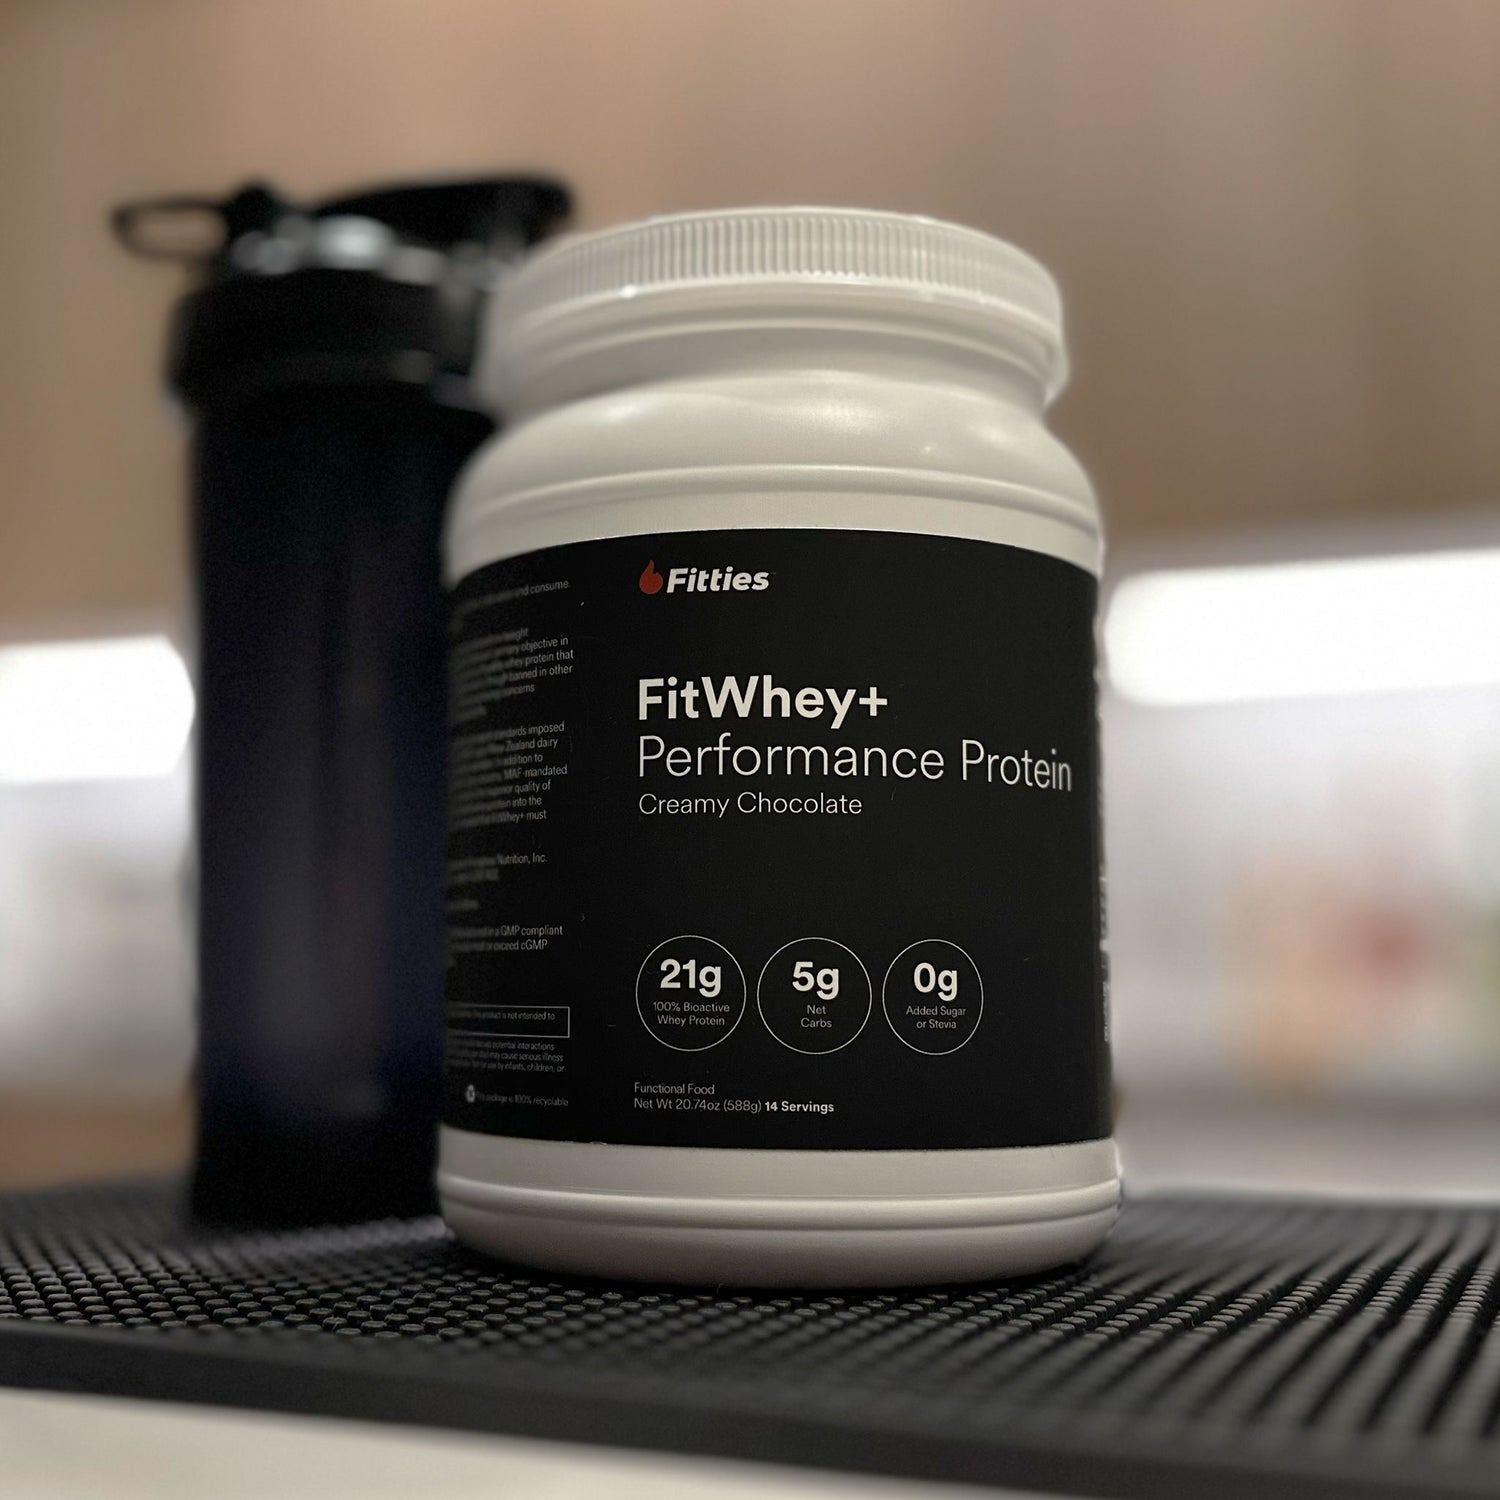 Closeup of FitWhey+ container on counter